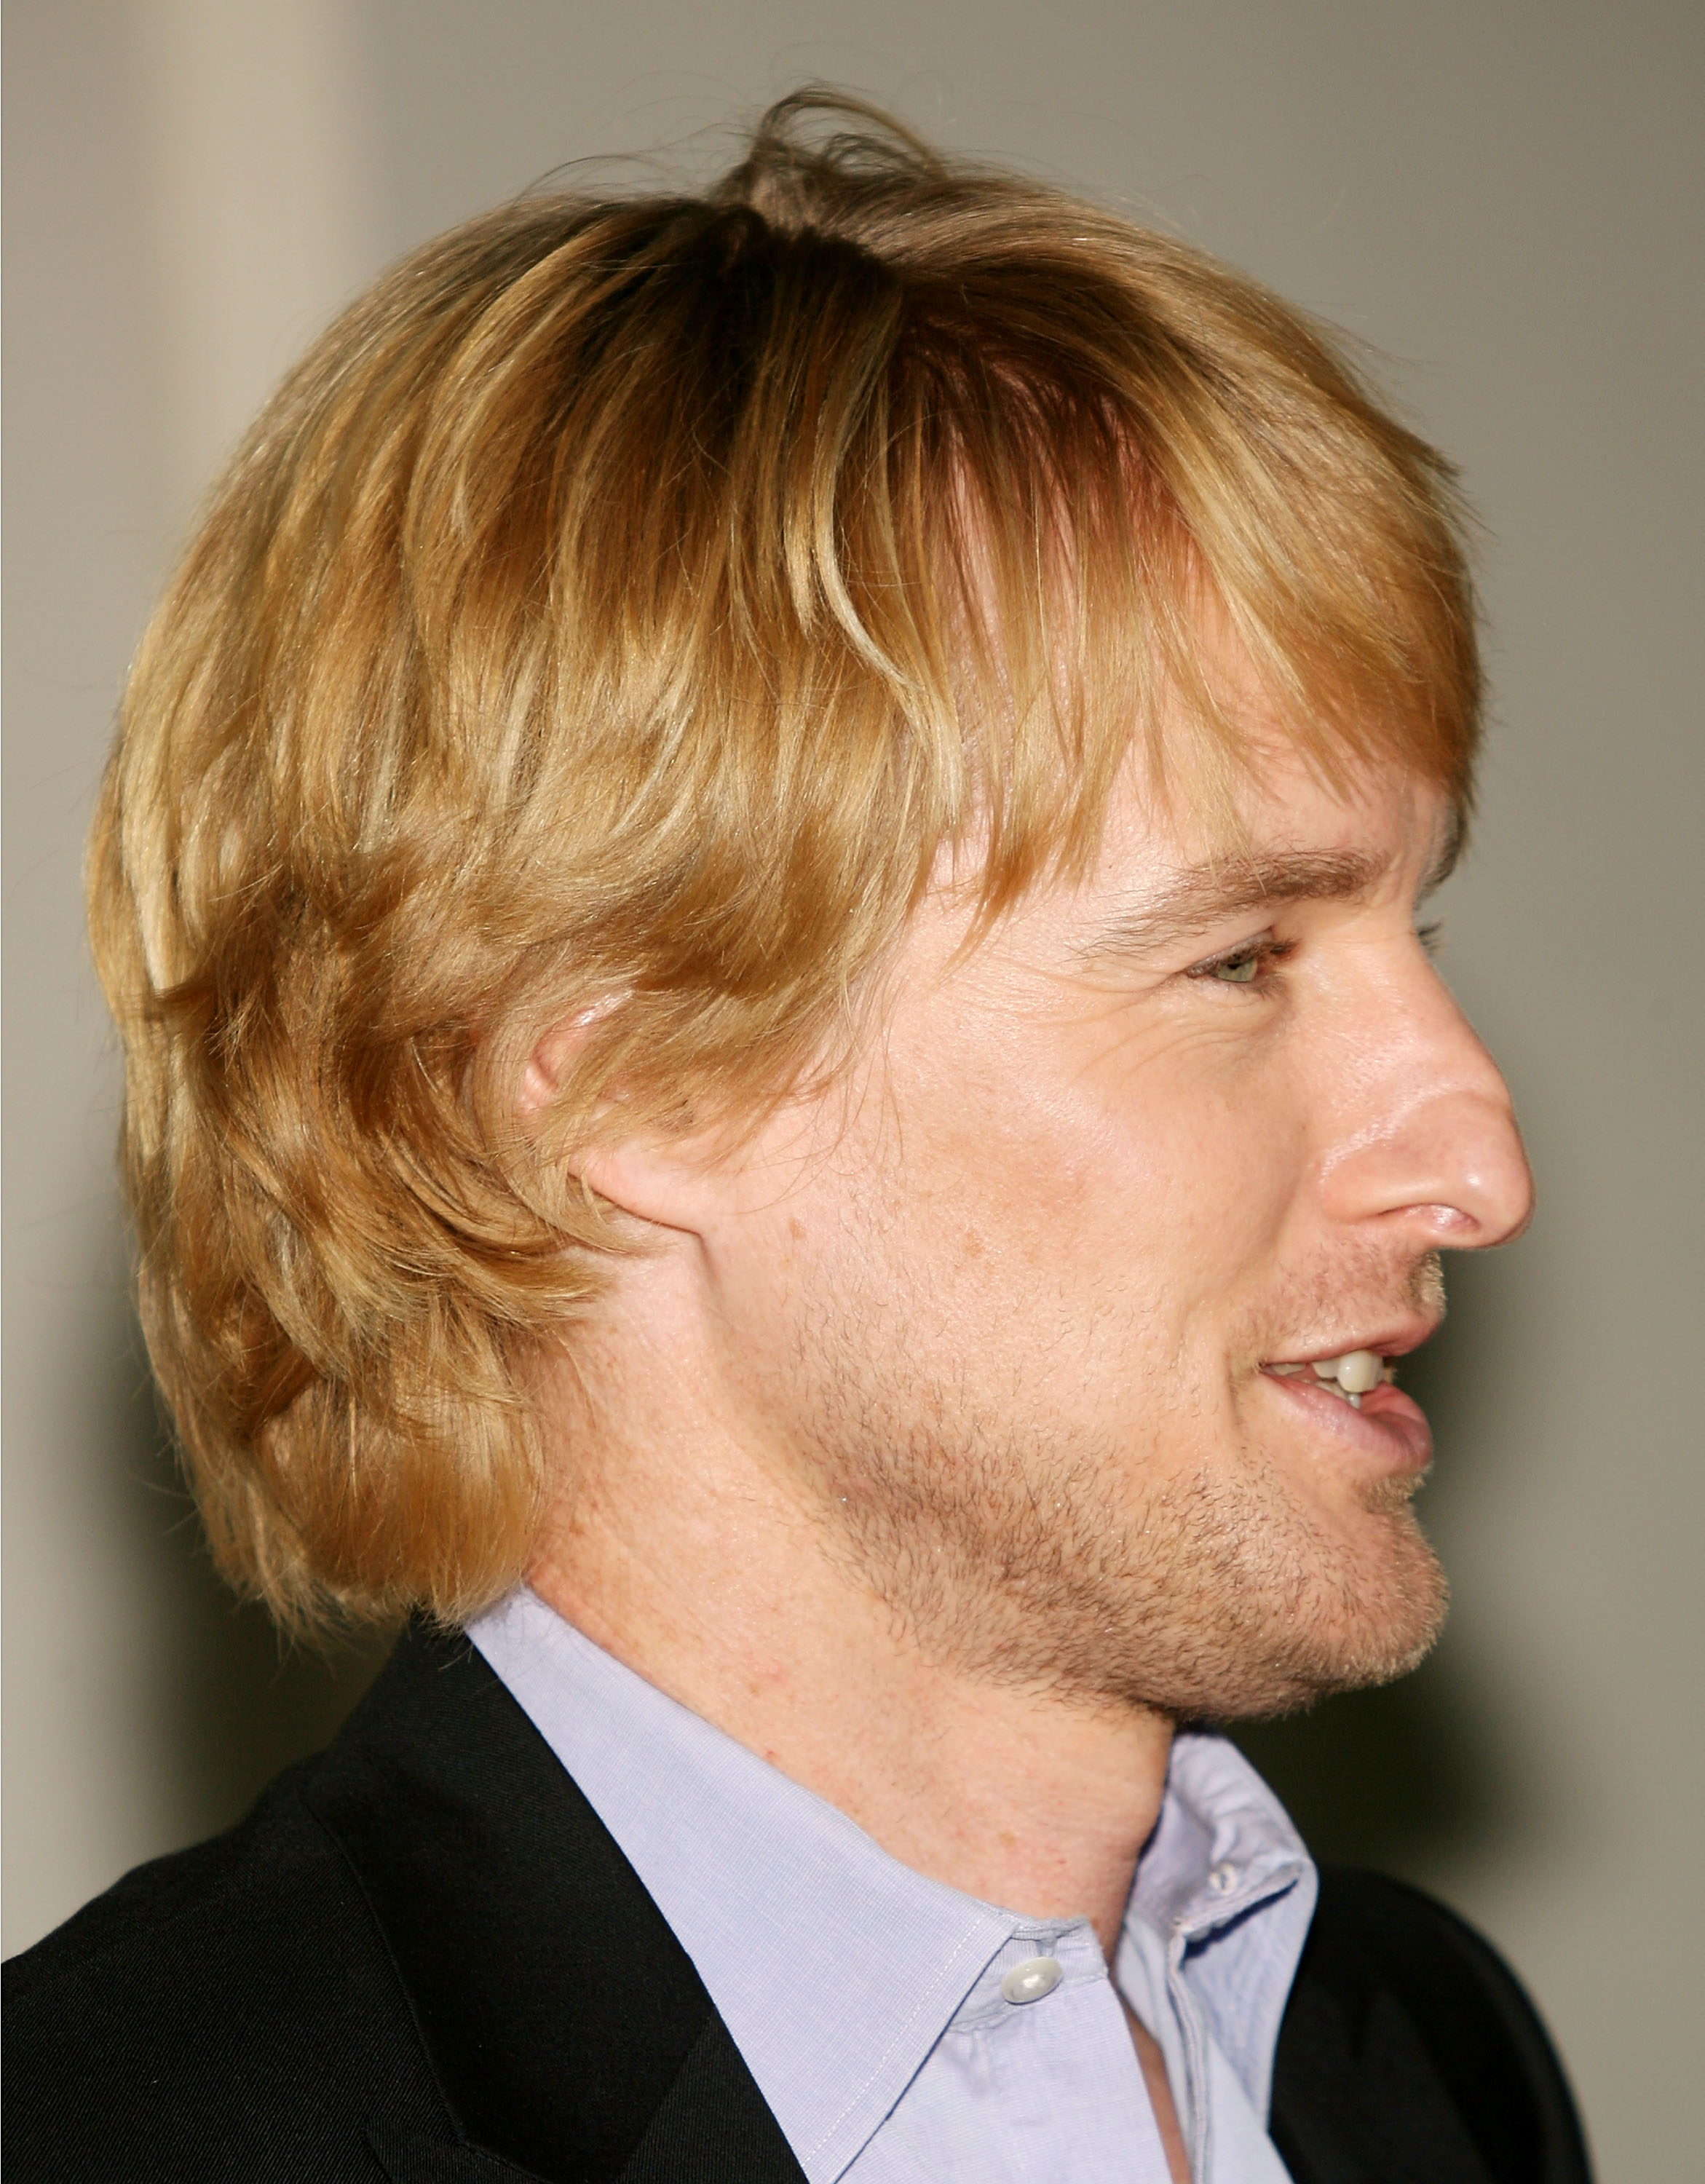 Owen Wilson attends the film premiere of "The Wendell Baker Story" at the Writers Guild Theater on May 10, 2007, in Beverly Hills, California | Source: Getty Images